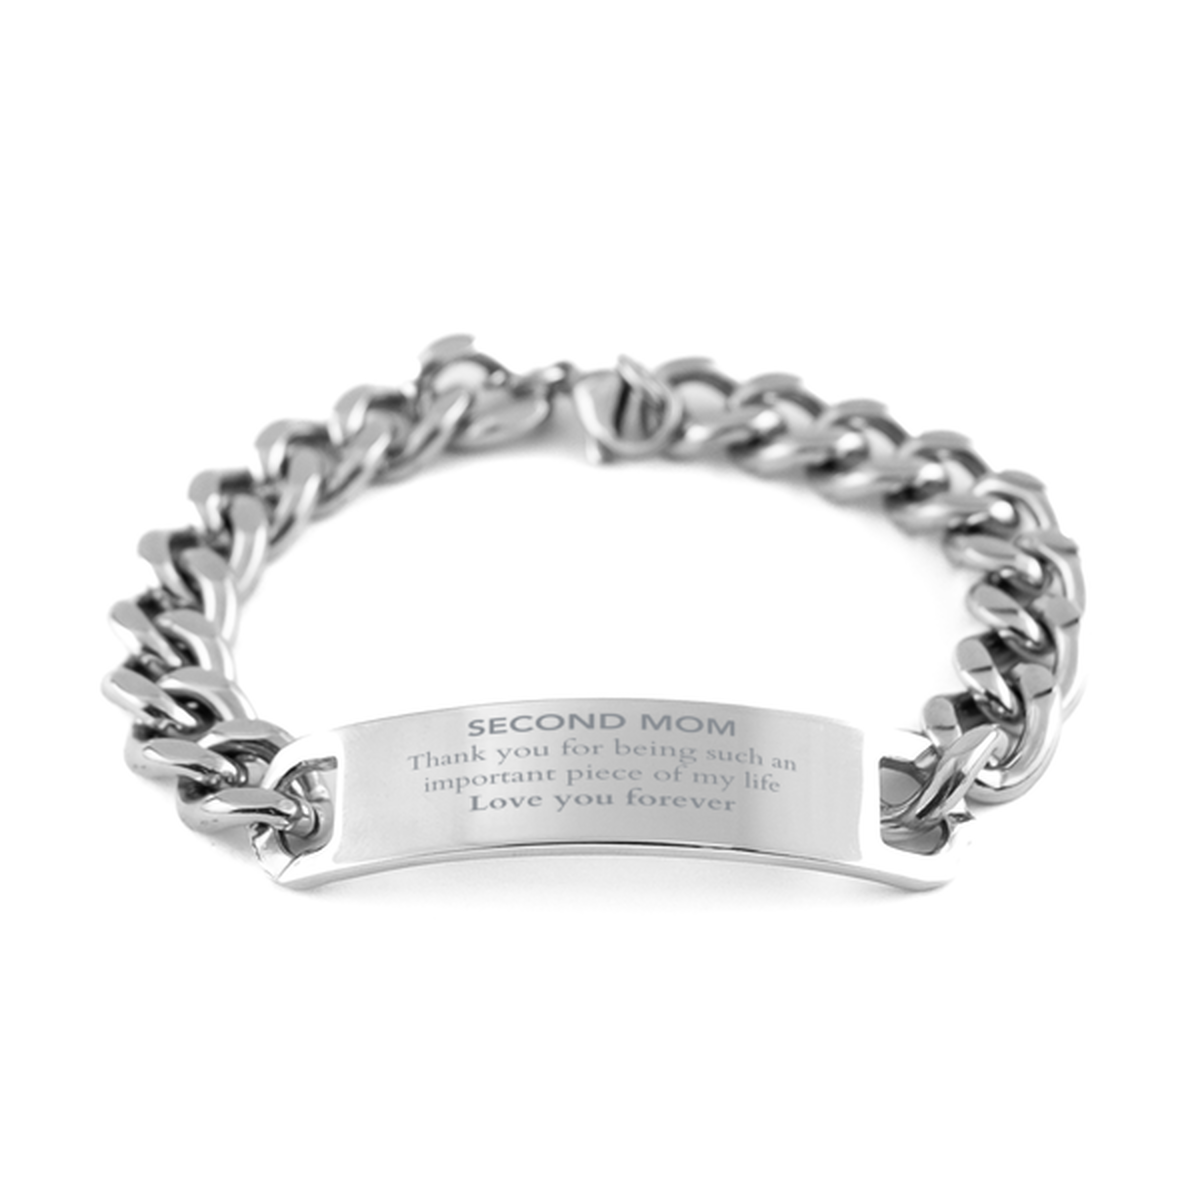 Appropriate Second Mom Cuban Chain Stainless Steel Bracelet Epic Birthday Gifts for Second Mom Thank you for being such an important piece of my life Second Mom Christmas Mothers Fathers Day